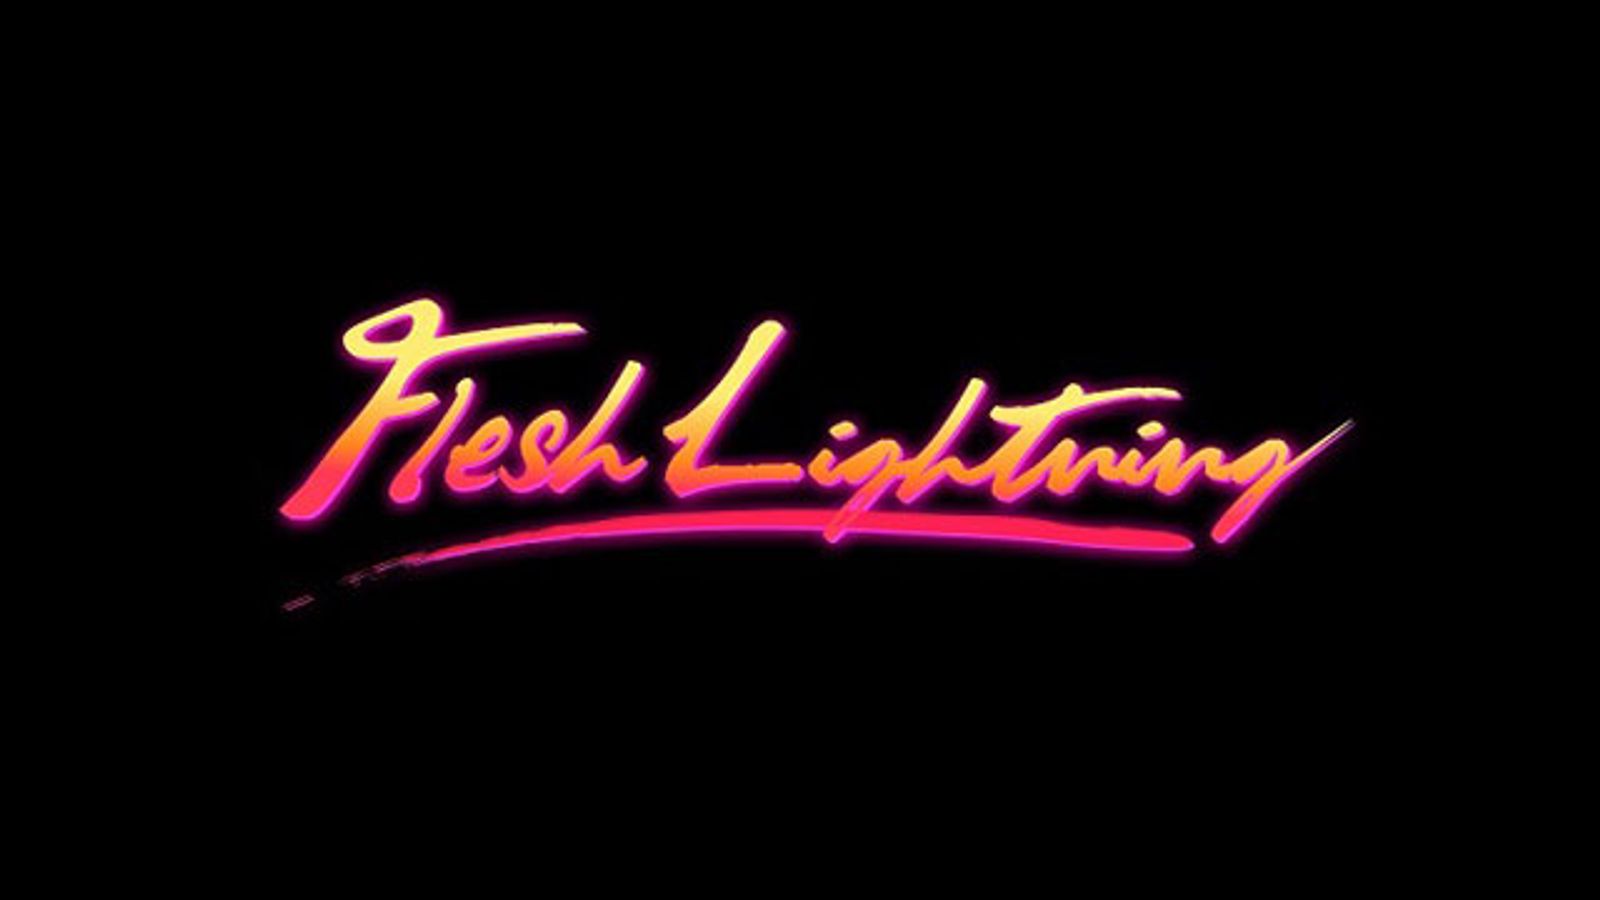 Middle of the Road Entertainment Fulfills Men’s Fantasies with 'FleshLightning'